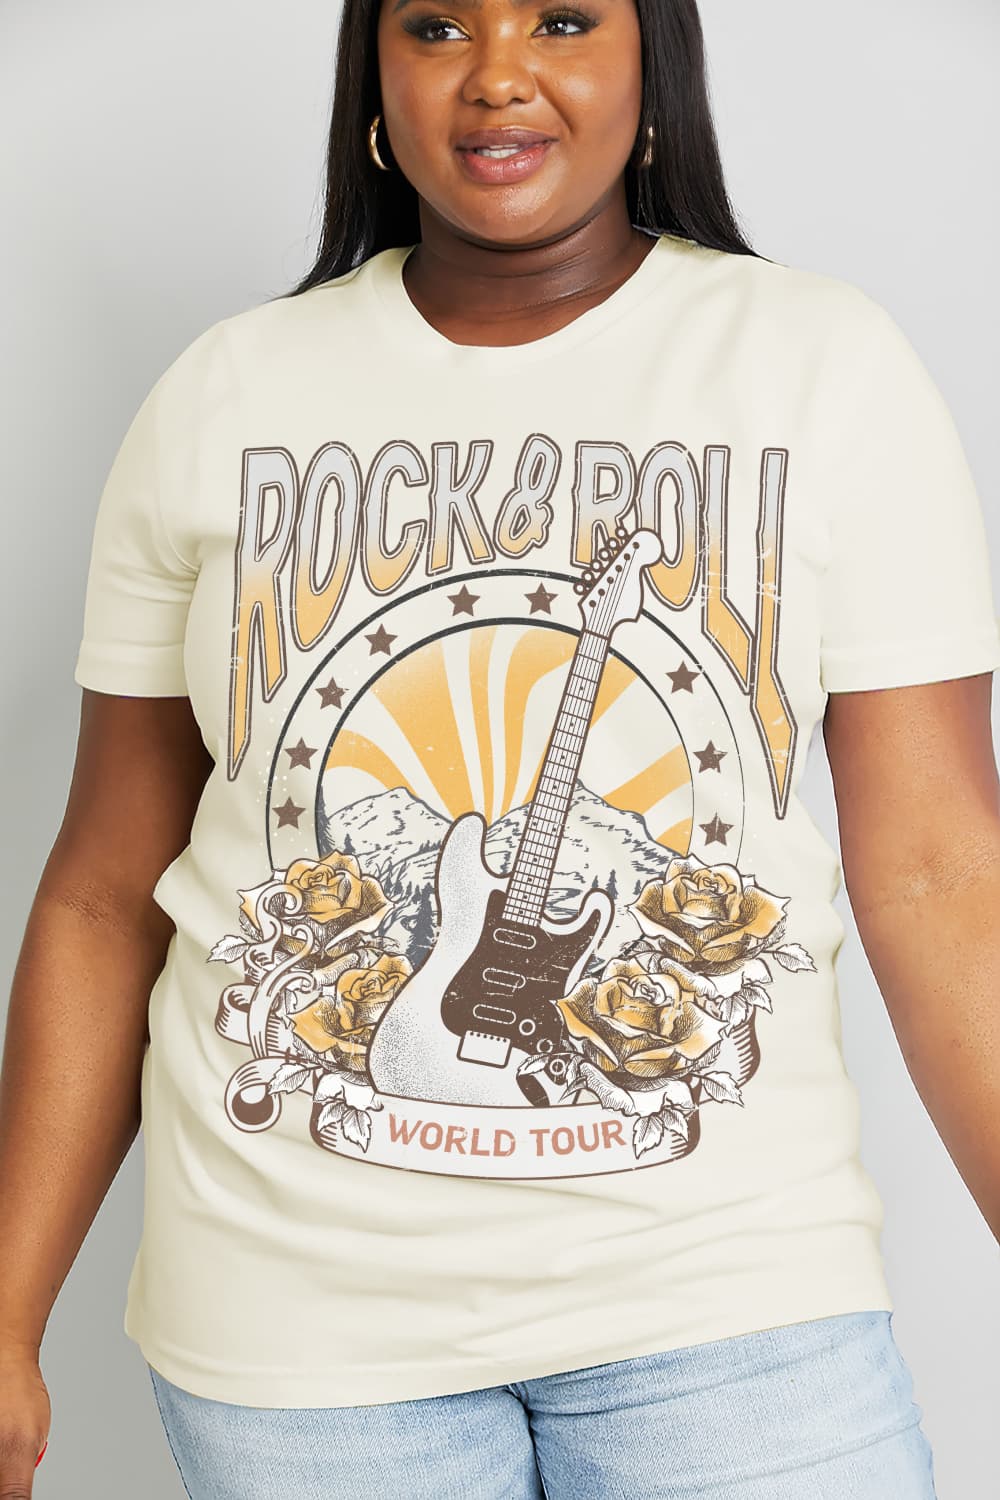 Simply Love ROCK & ROLL WORLD TOUR Graphic Tee